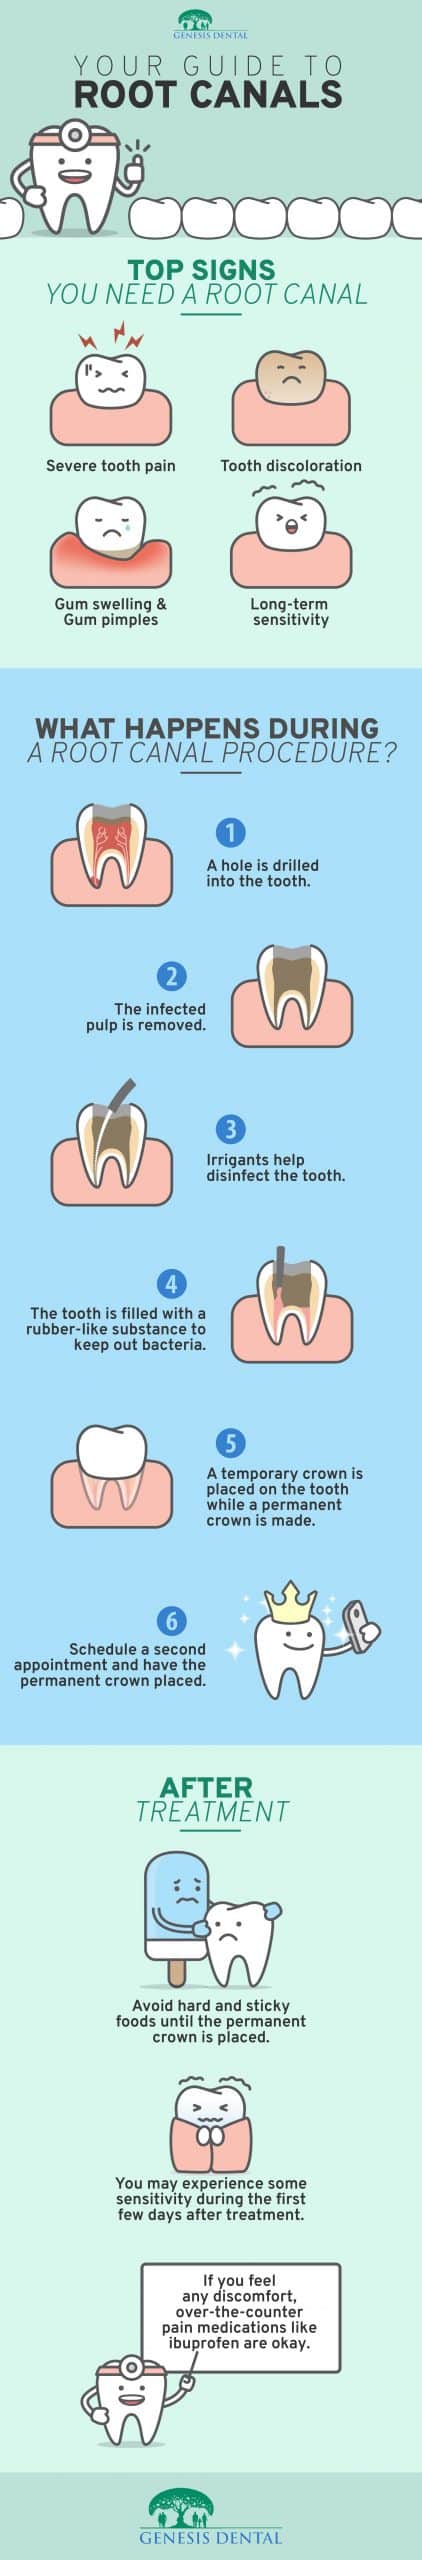 An infographic about root canals